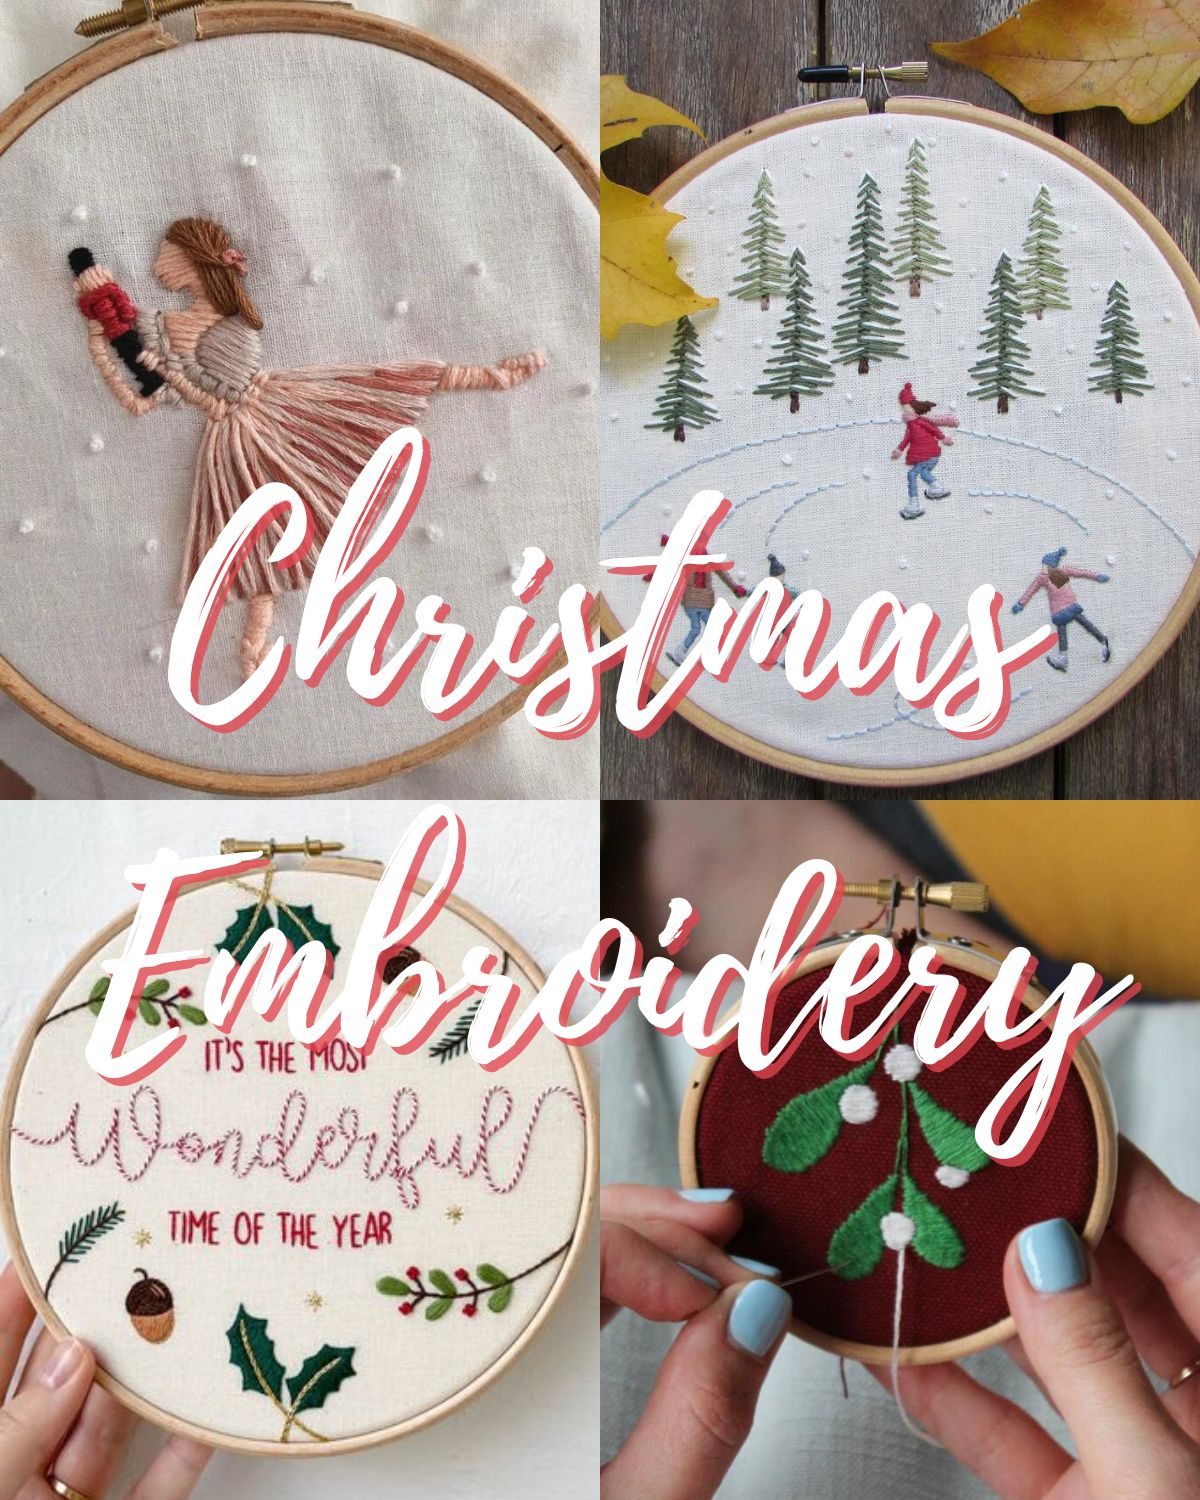 Four pieces of embroidery about Christmas 